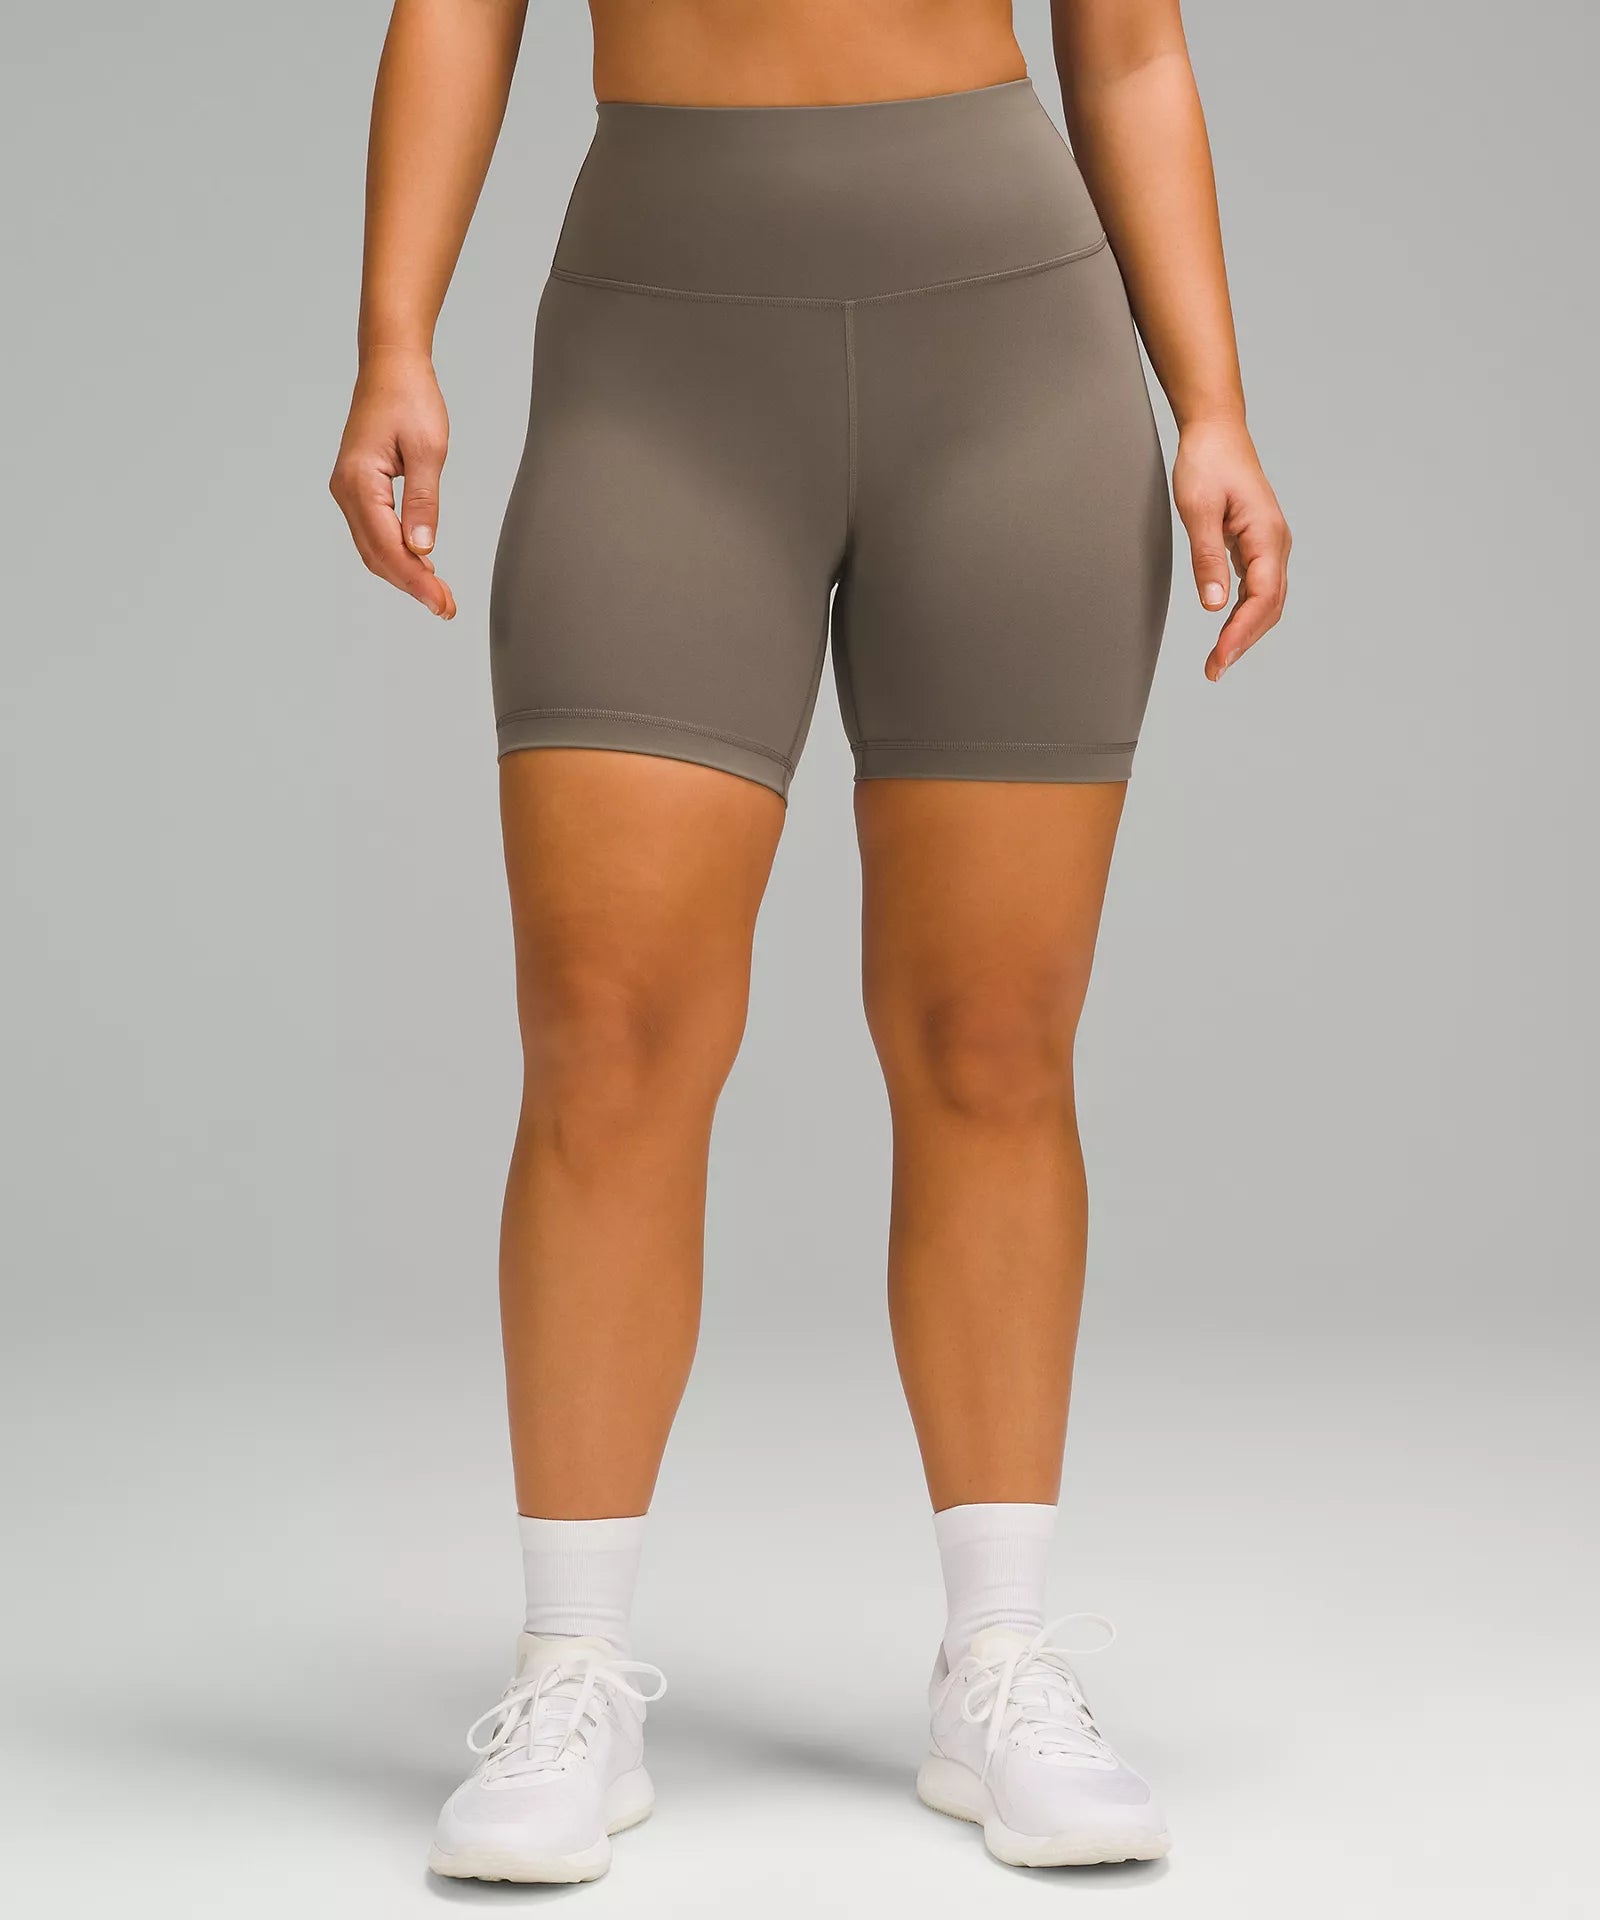 21 Running Shorts For Thick Thighs That Won't Chafe - Starting at